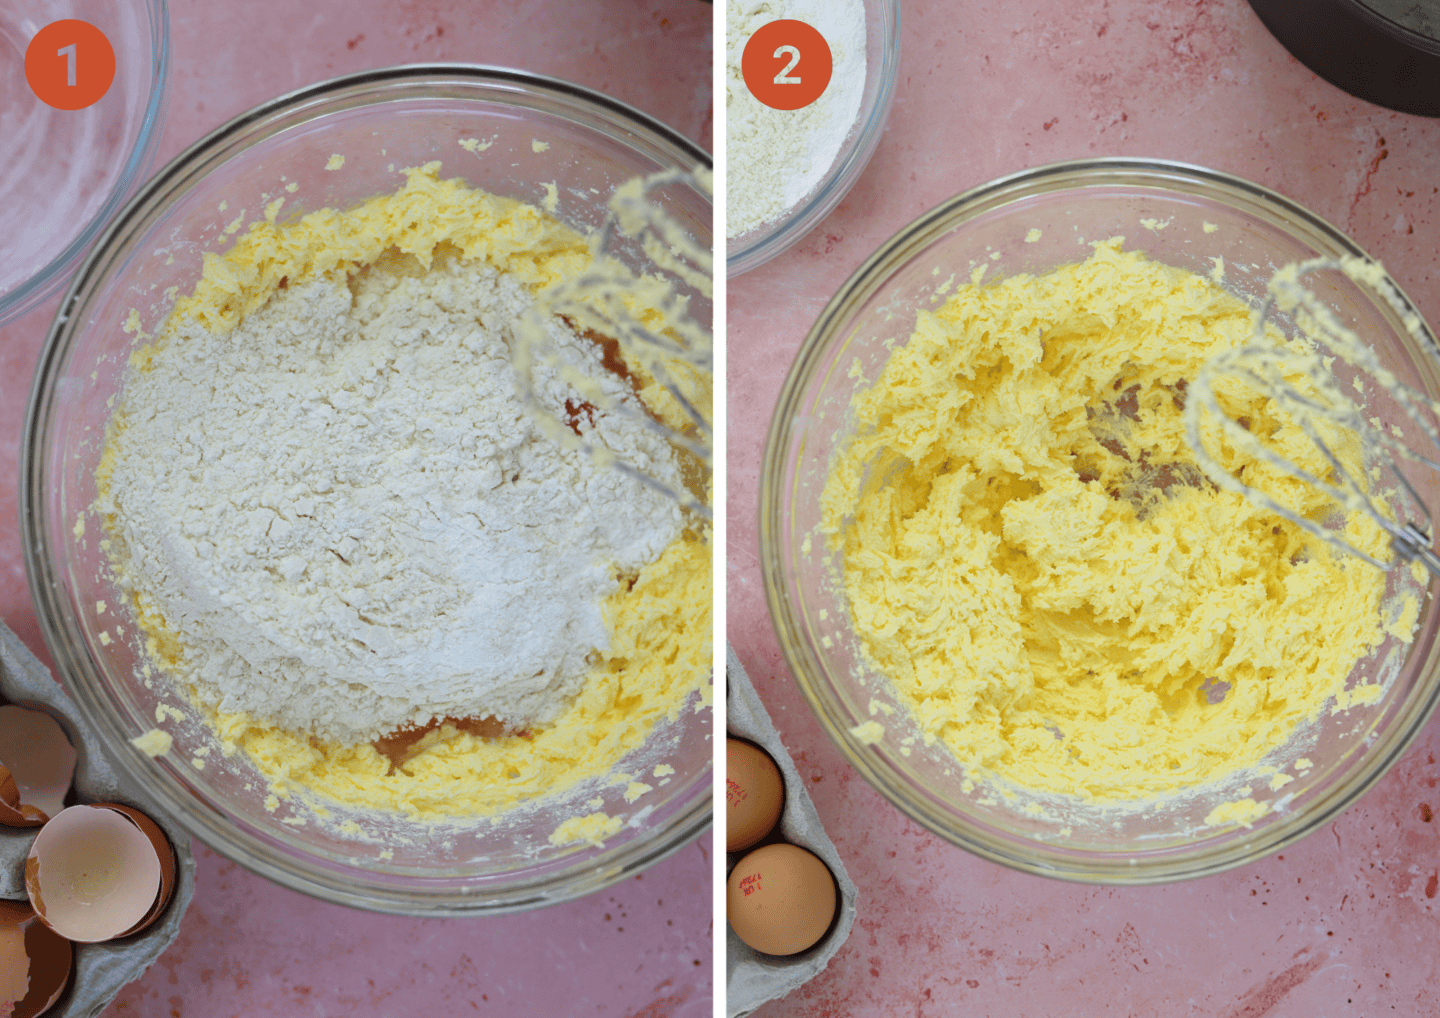 Cream the butter and sugar together in a mixing bowl.